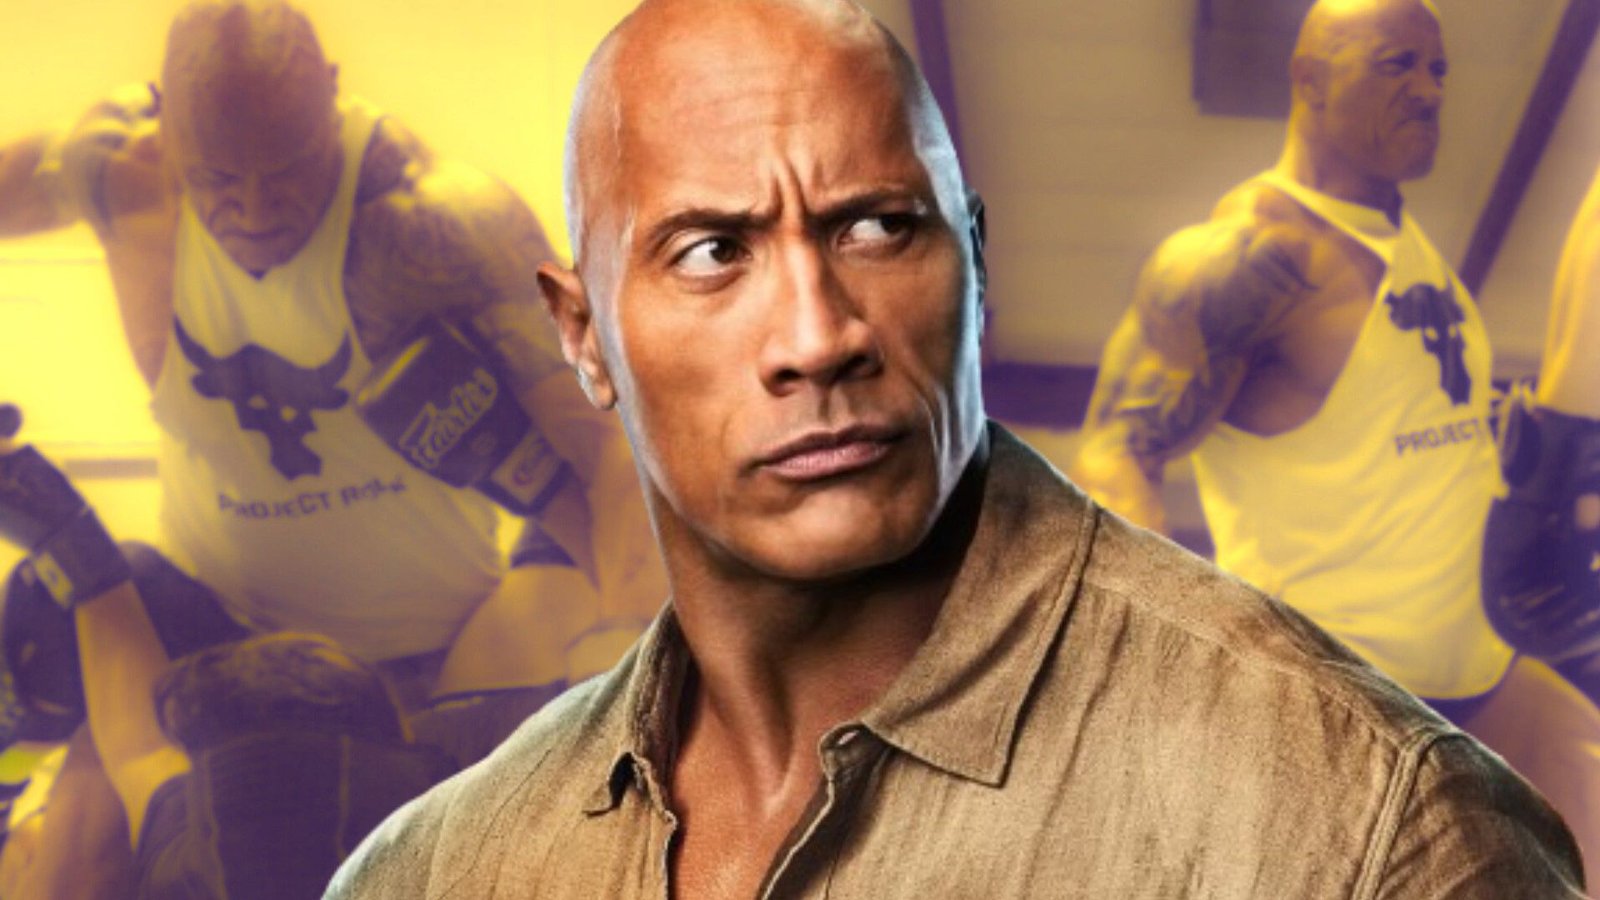 The Rock Reveals His Intense MMA Training for A24’s The Smashing Machine: 'I’m Learning Daily'